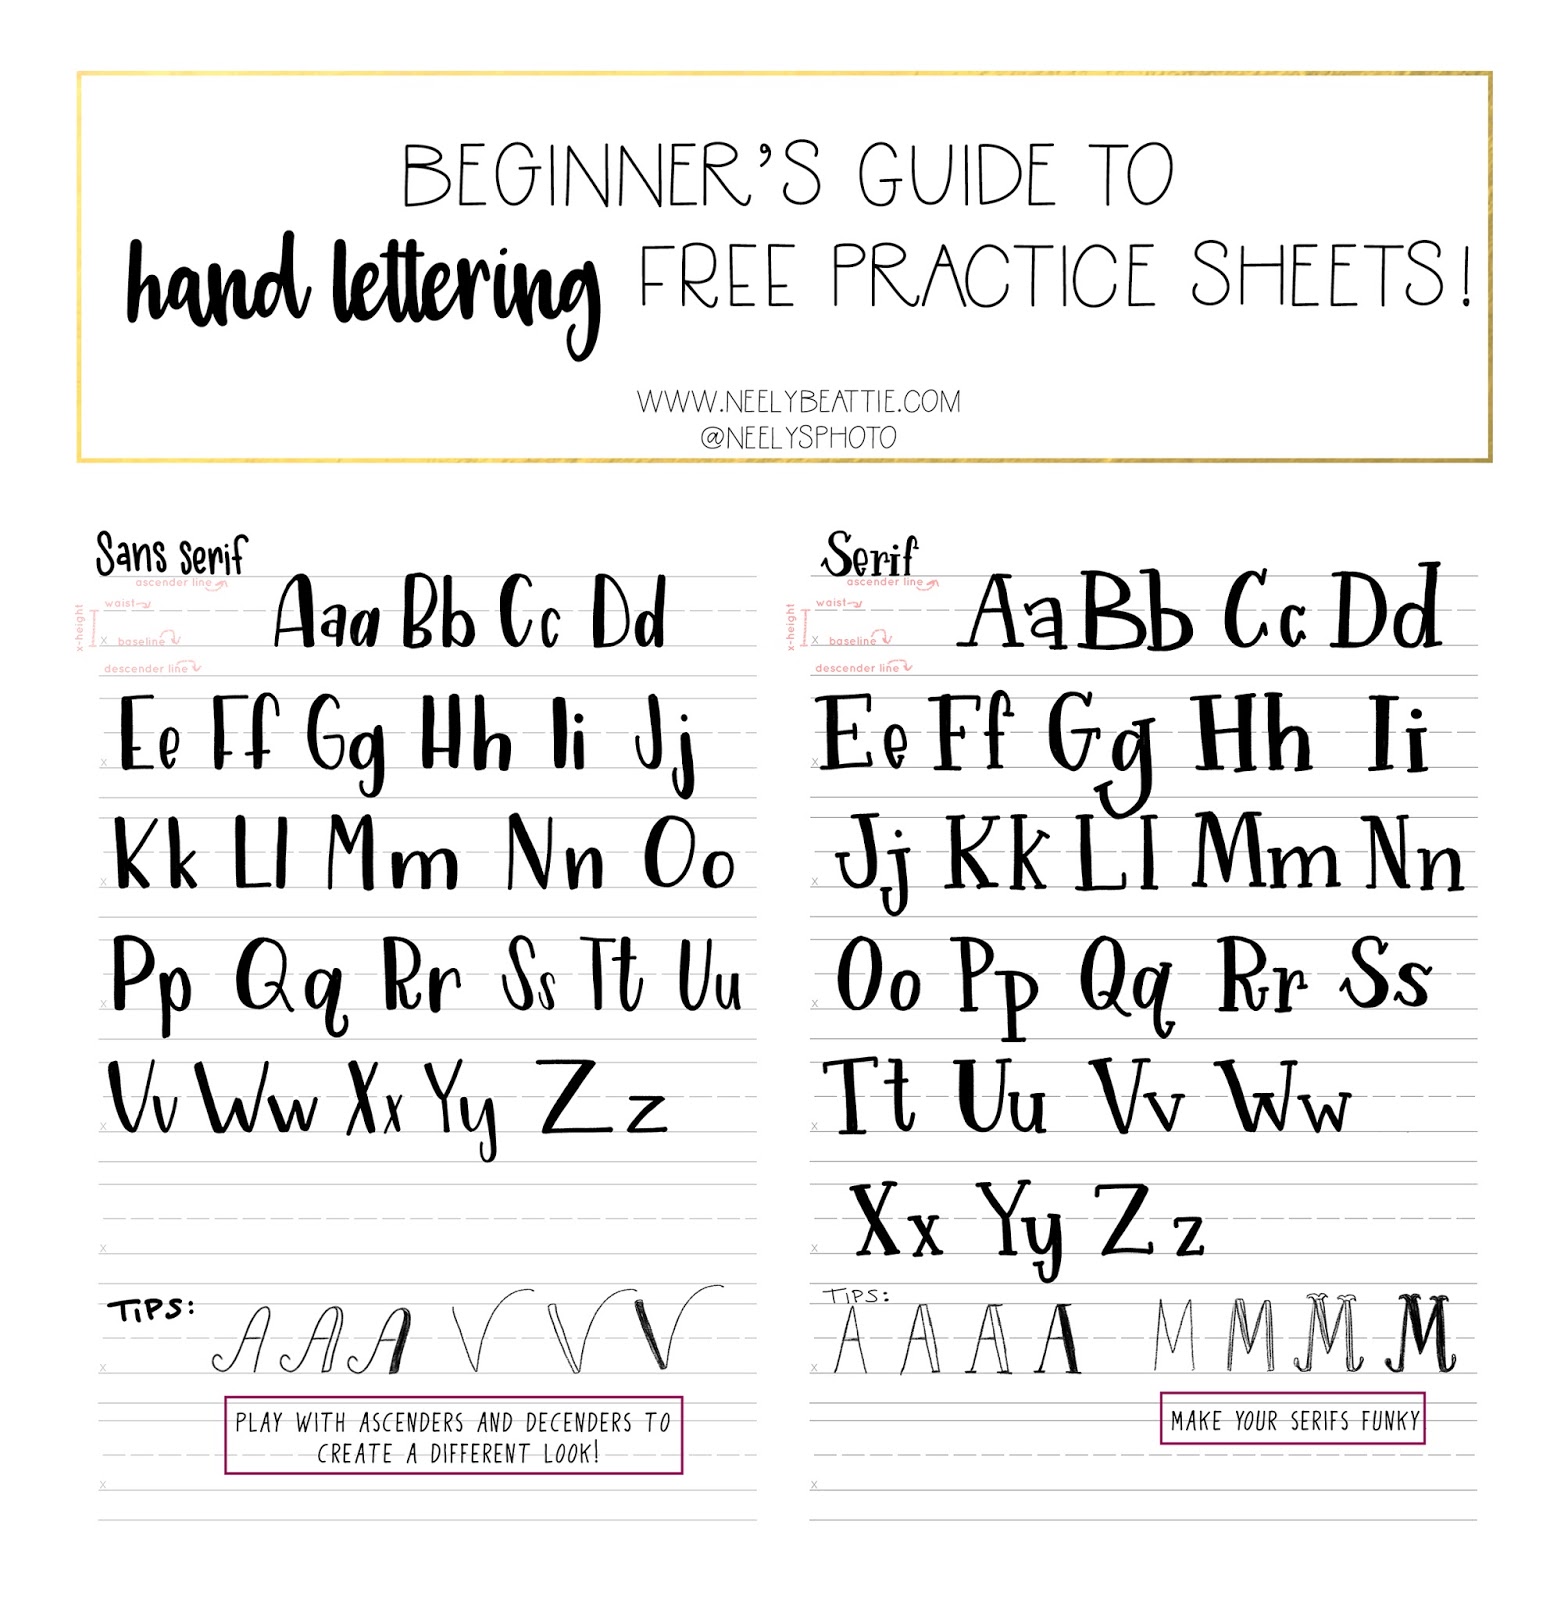 Beginners Guide to Hand Lettering! And a FREEBIE! neely beattie